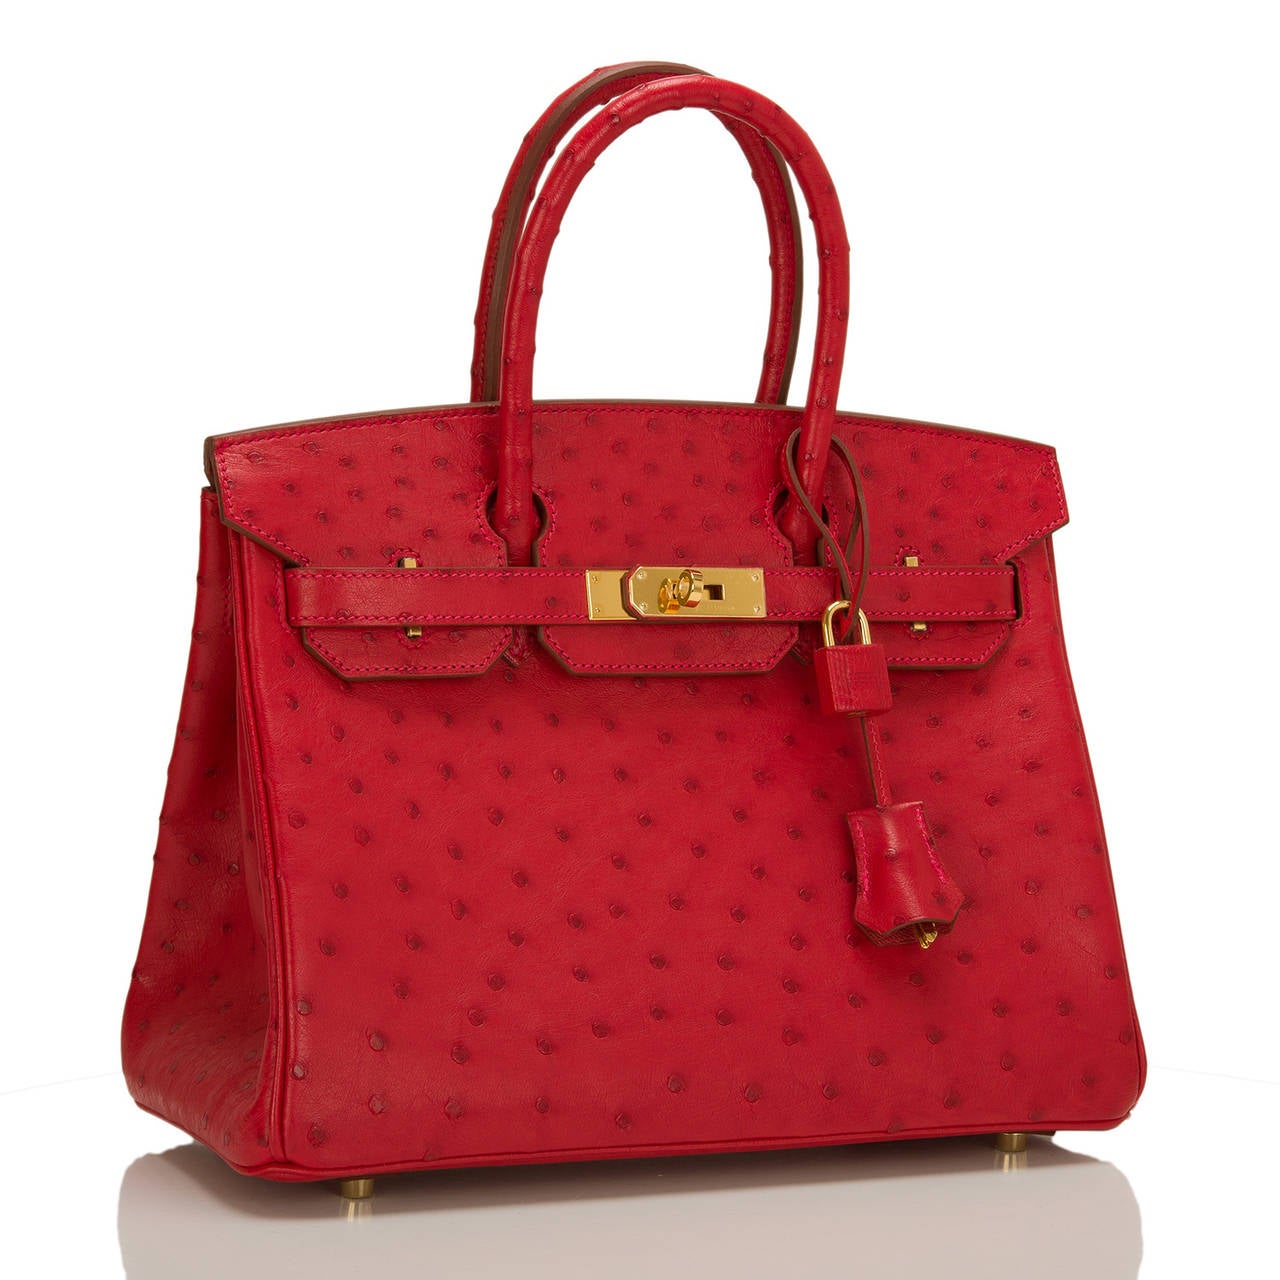 Hermes Rouge Vif 30cm in Ostrich with gold hardware.

This Birkin features tonal stitching, front toggle closure, clochette with lock and two keys, and double rolled handles. The interior is lined in Rouge Vif chevre with one zip pocket with an